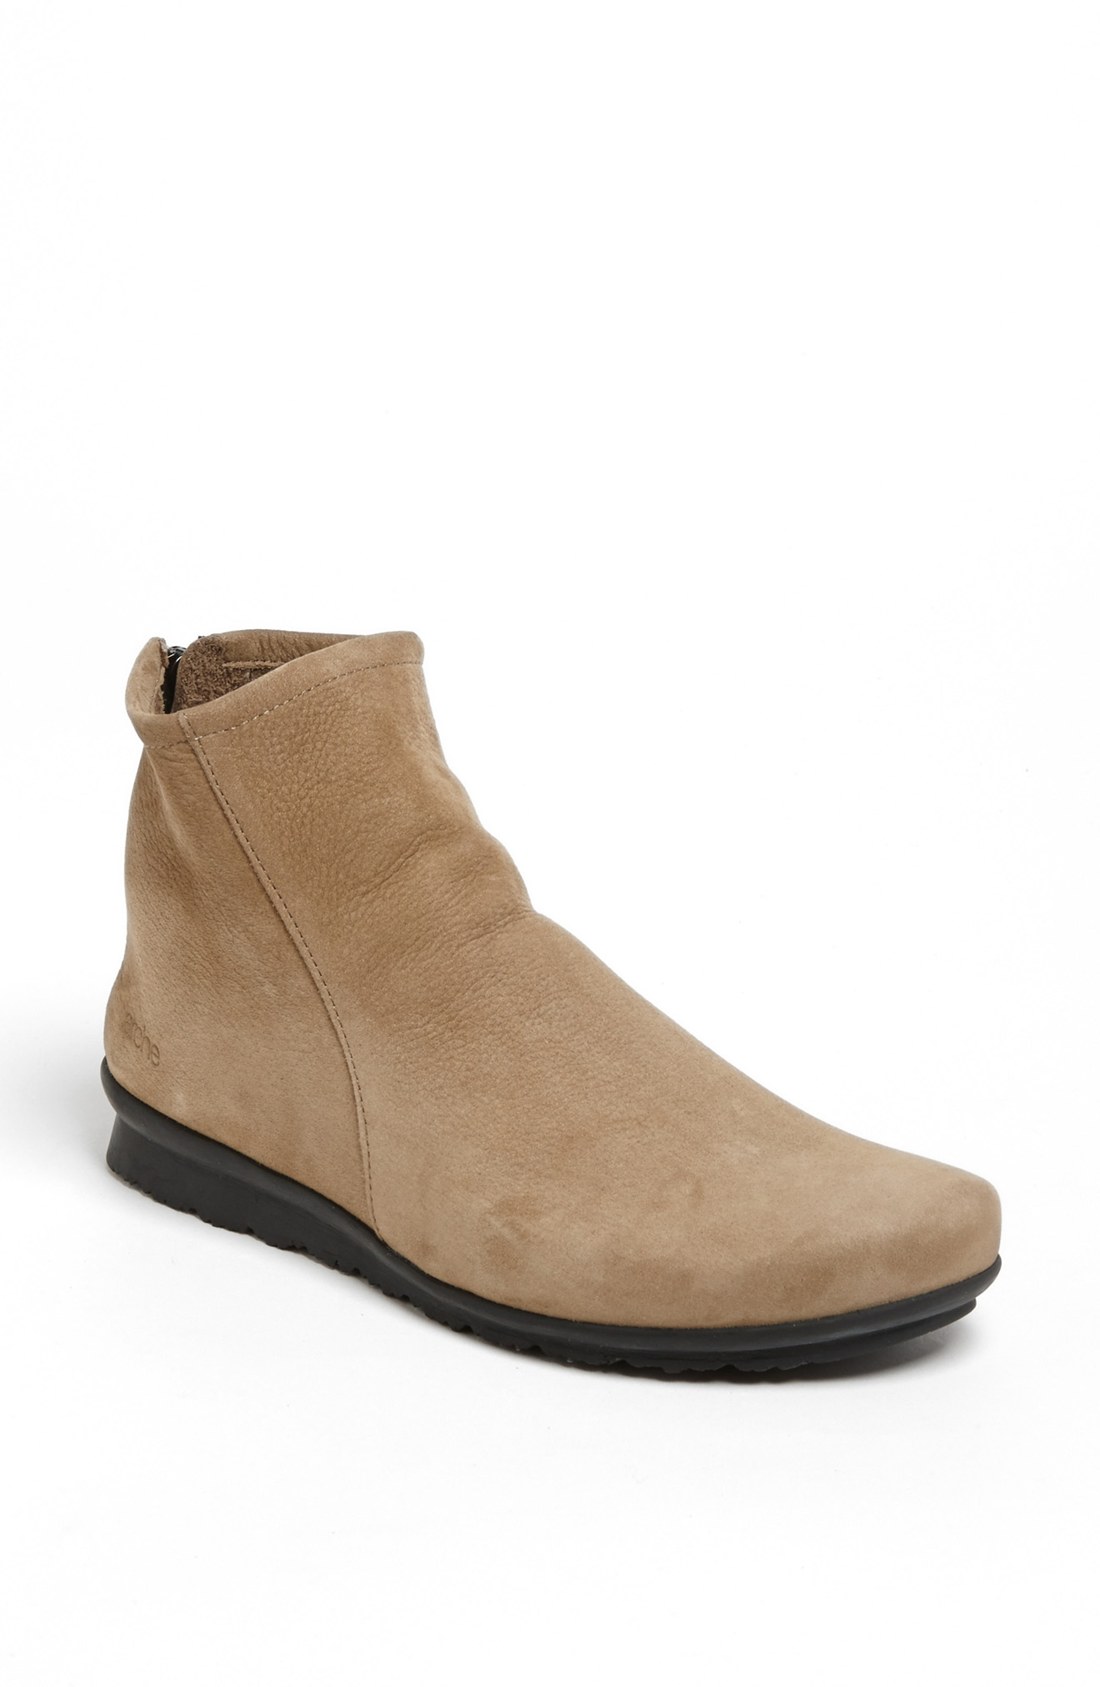 Arche 'Baryky' Boot in Brown (Noisette) | Lyst